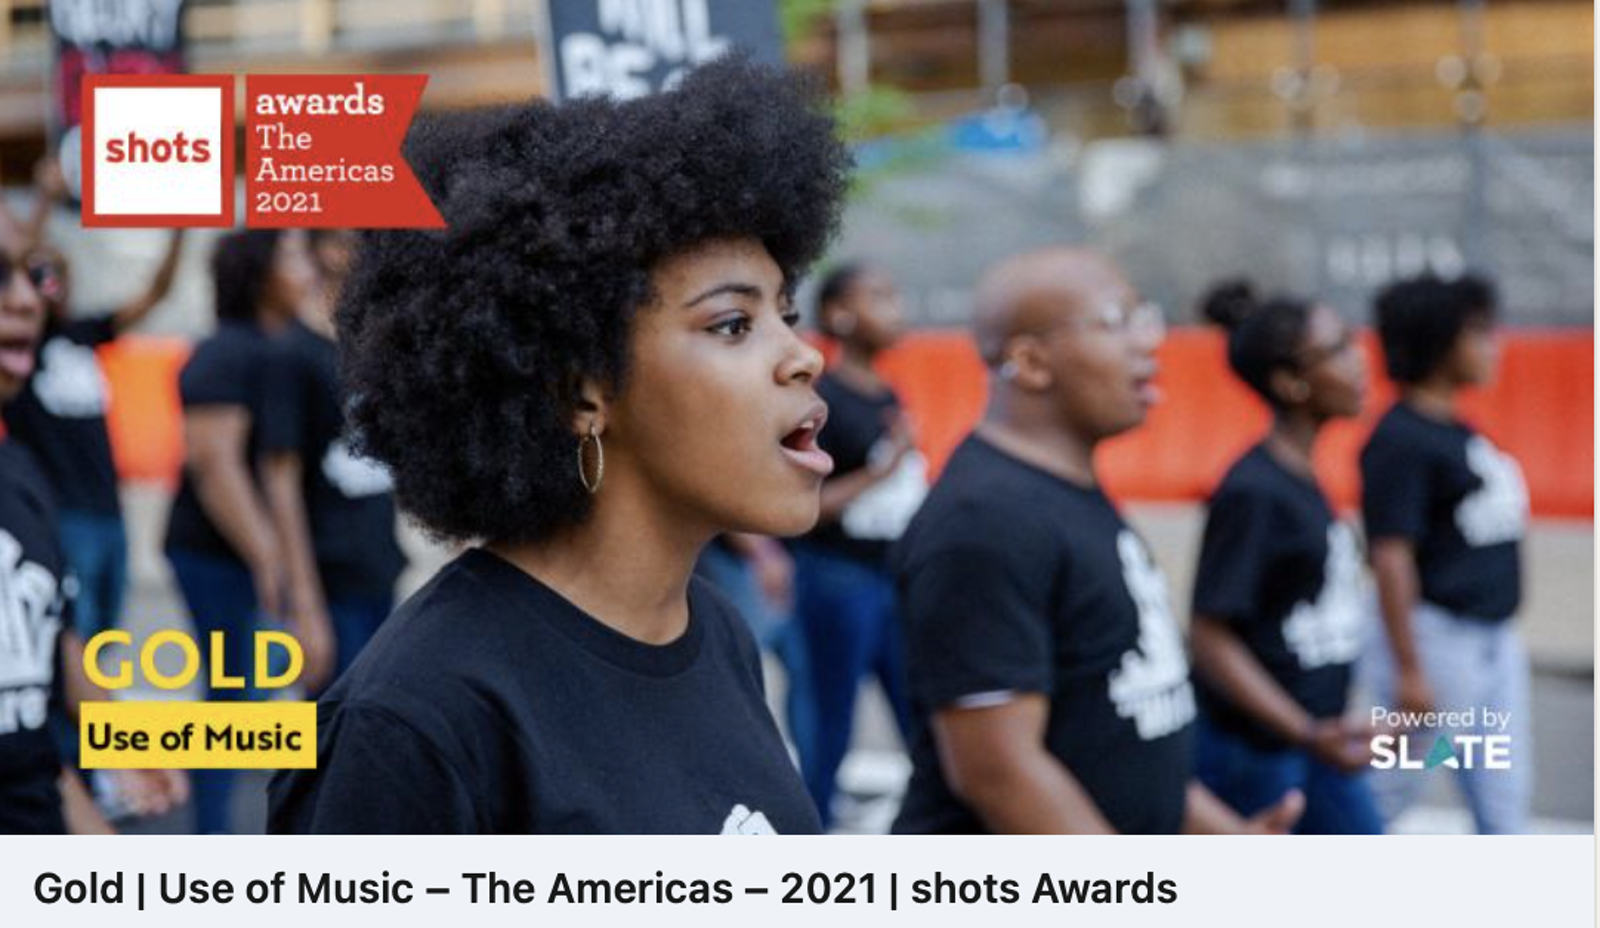 2021 Ad of the Year: Best Use of Music Gold - Shots Awards The Americas